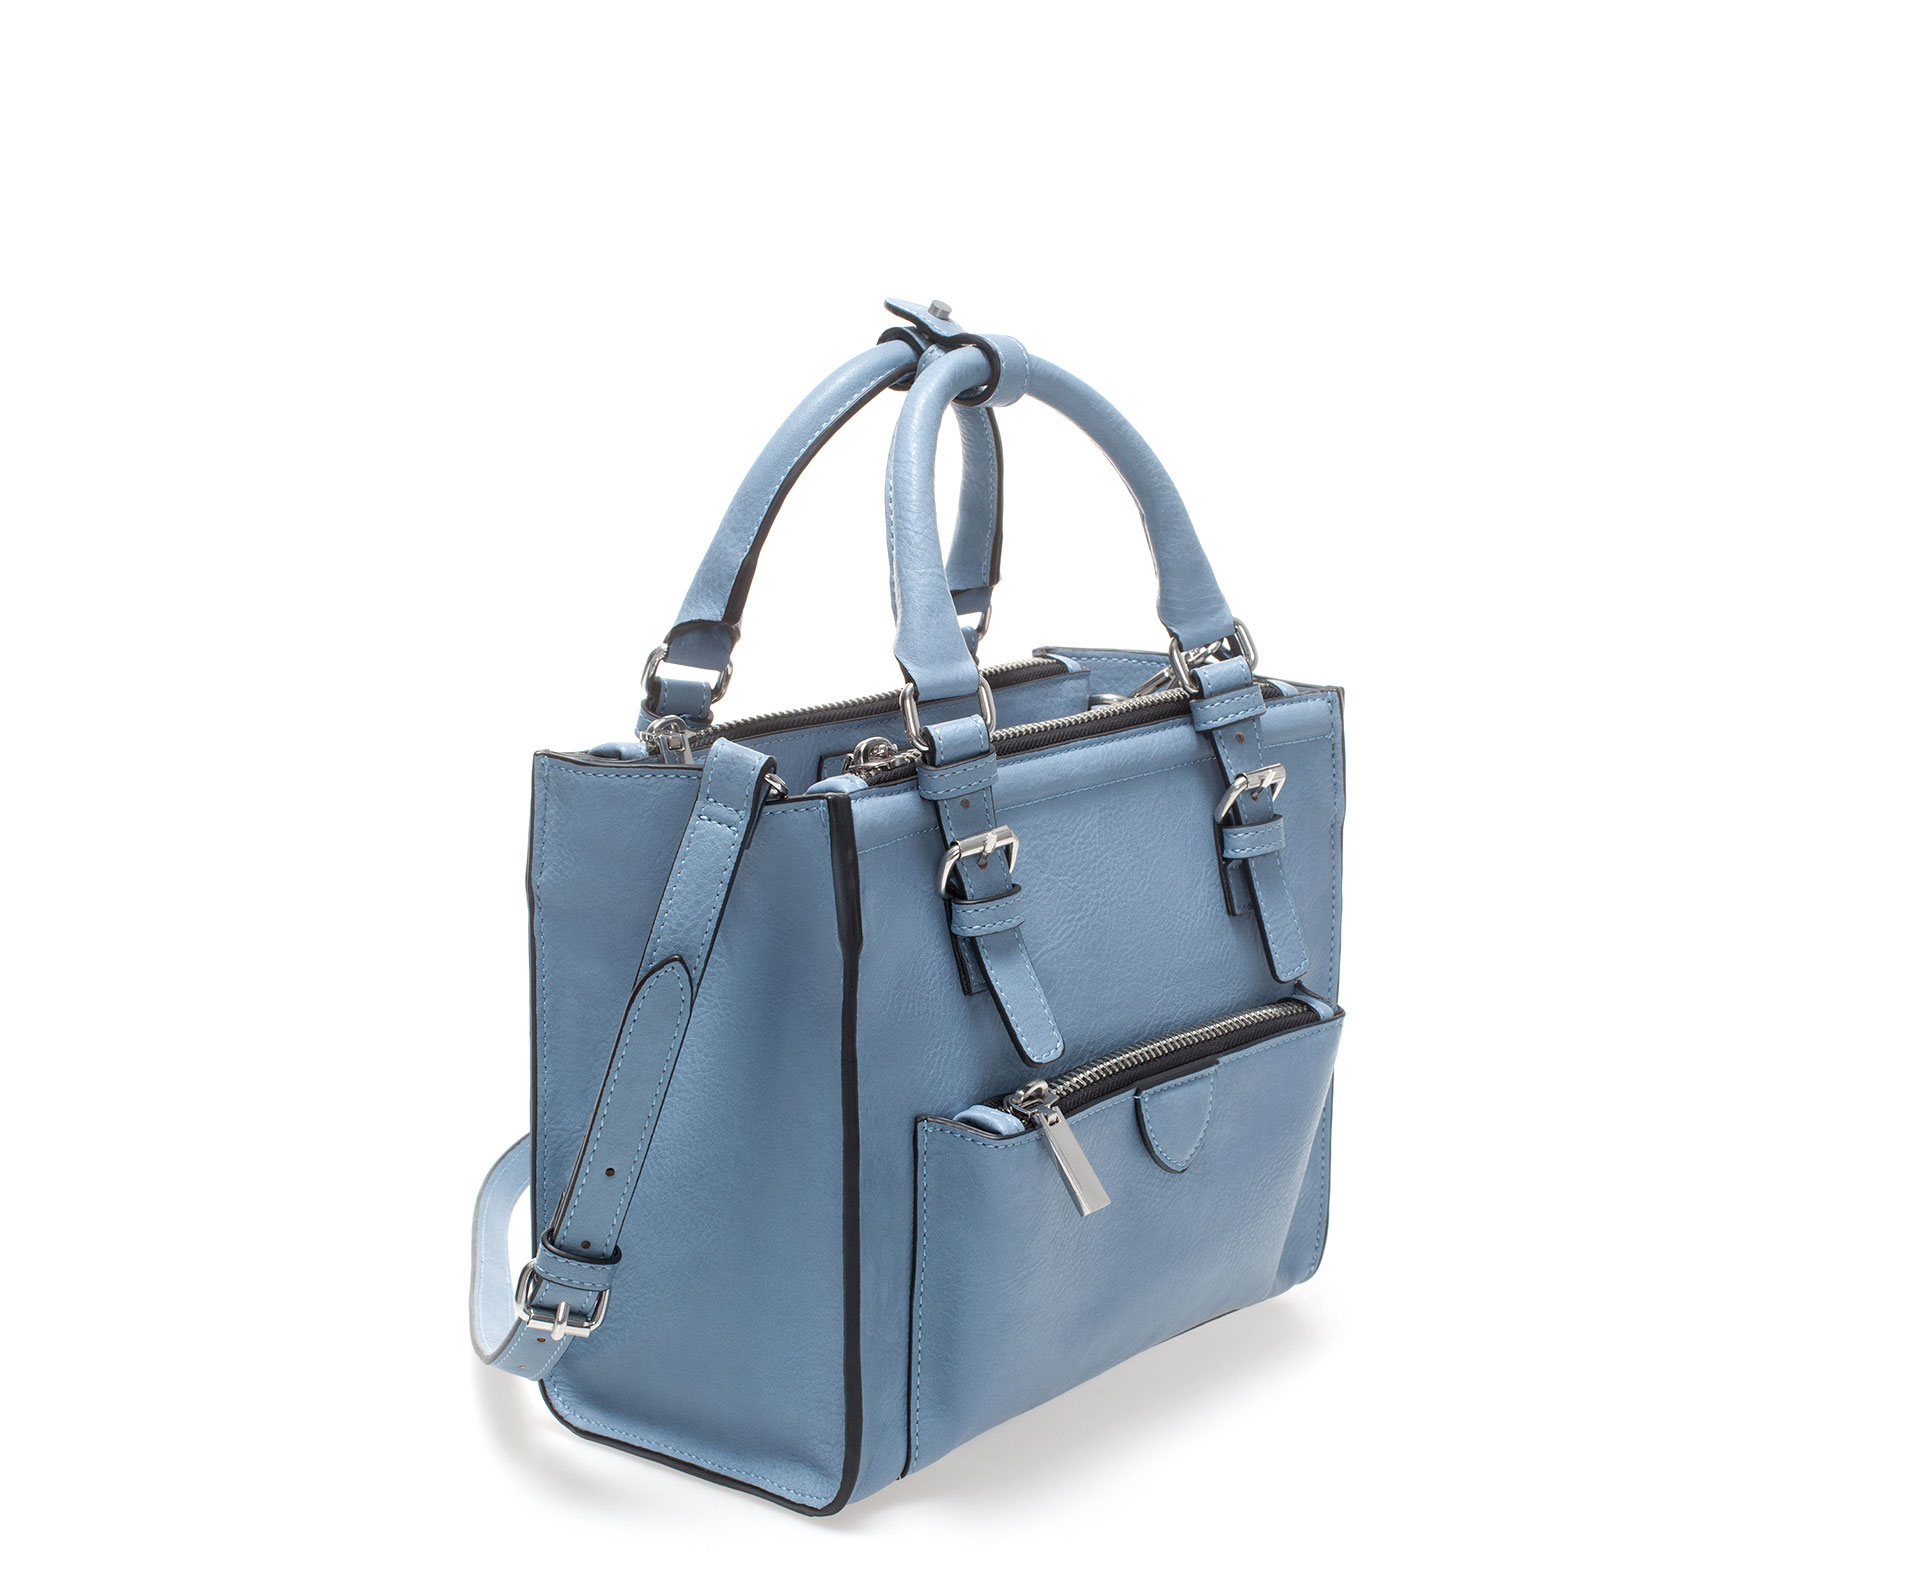 Zara Mini City Bag with Zip Details in Blue (Jeans)